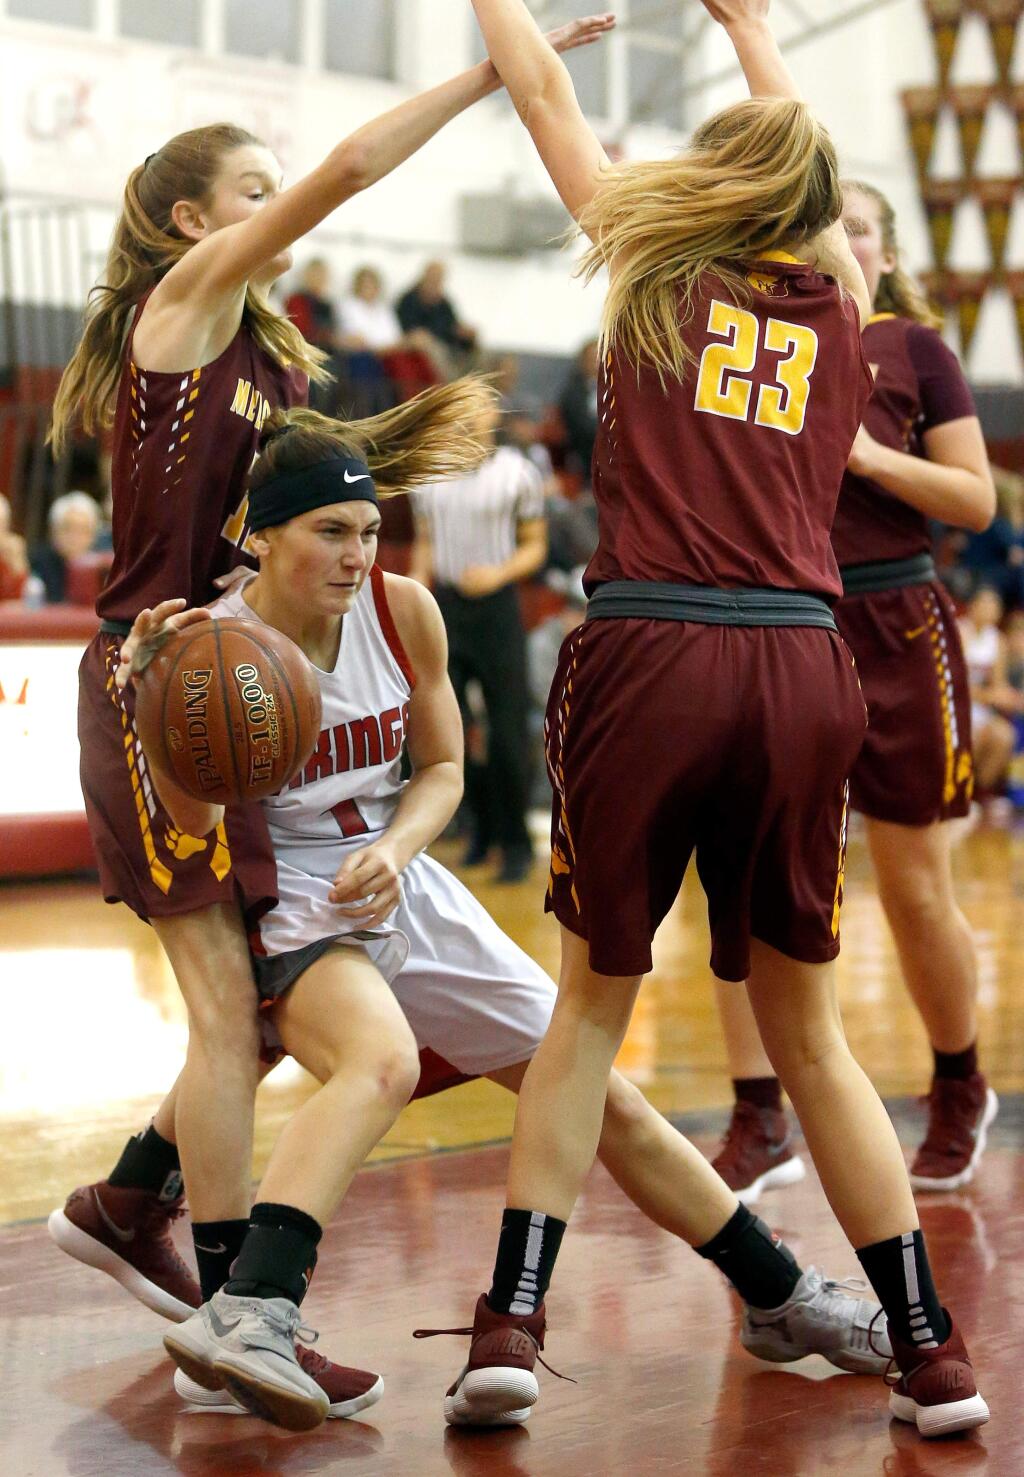 Montgomery's Ciarah Michalik (1), center, dishes a pass back outside between Menlo-Atherton's Linnea Lindblom (11) and Emilie Mueller (23) during the first half of the CIF NorCal Division 2 first round playoff girls basketball game between Menlo-Atherton and Montgomery high schools, in Santa Rosa, California, on Wednesday, March 7, 2018. (Alvin Jornada / The Press Democrat)